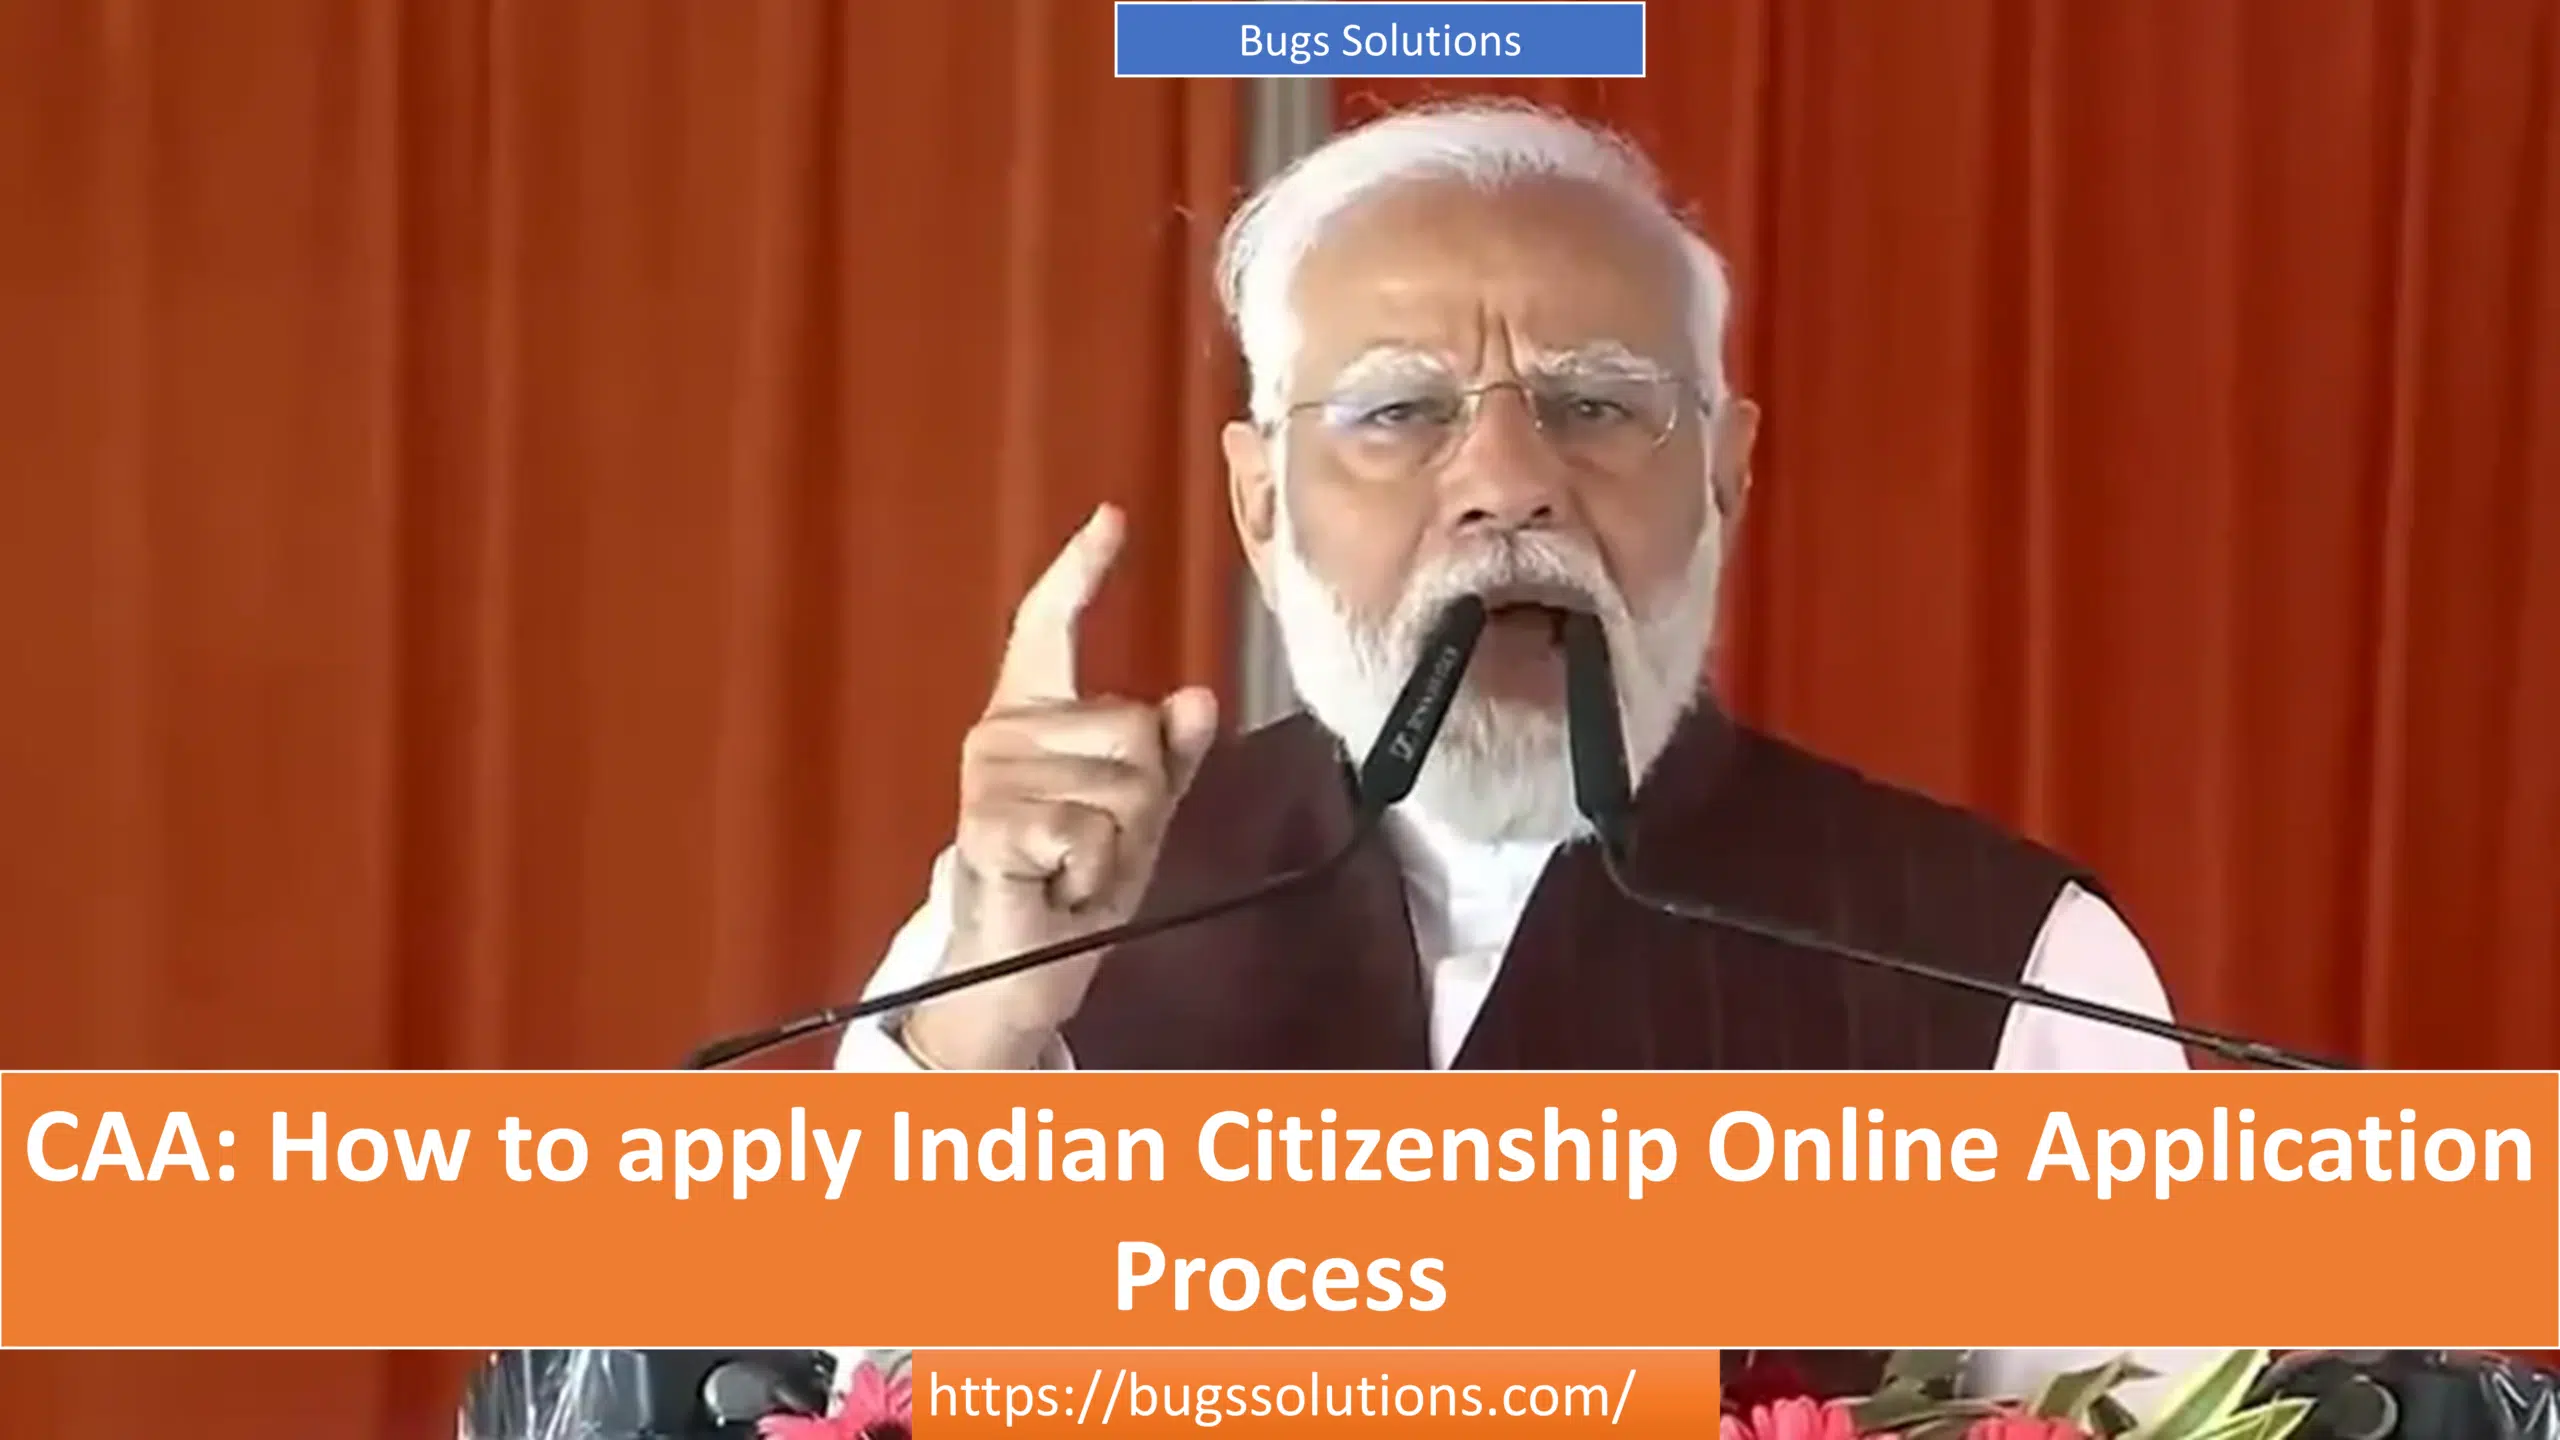 CAA: How to apply Indian Citizenship Online Application Process - Bugssolutions